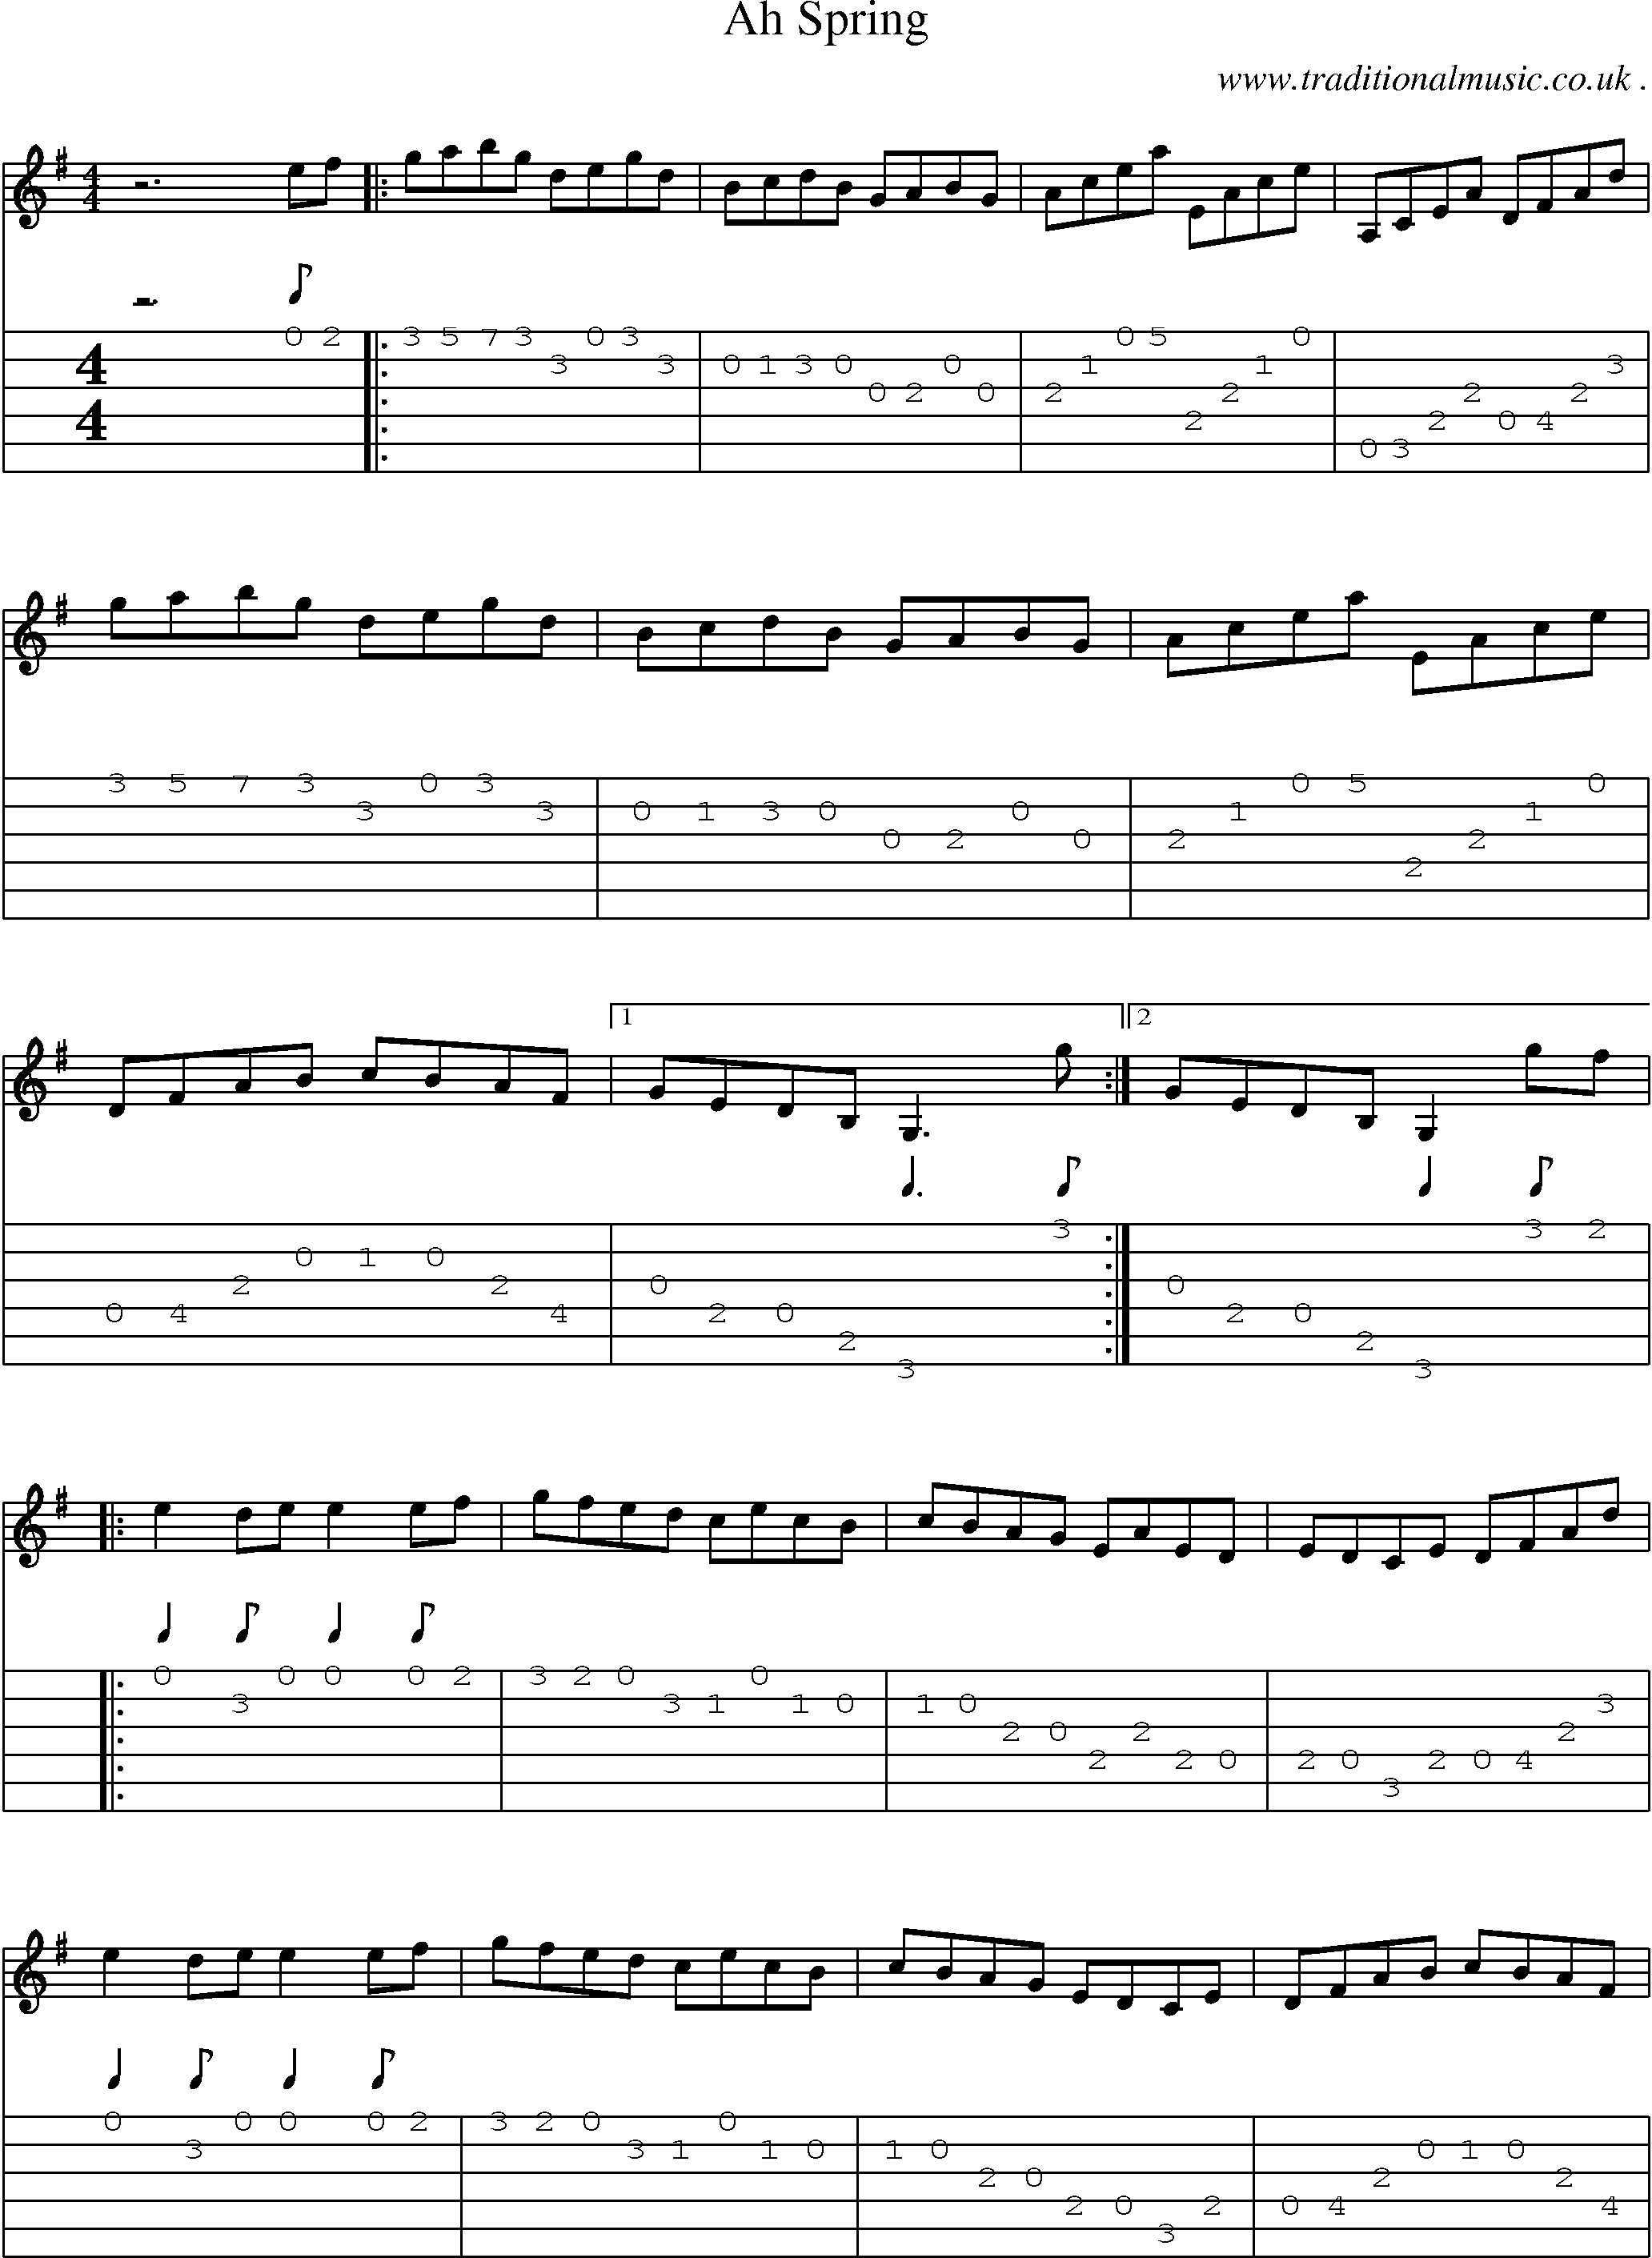 Music Score and Guitar Tabs for Ah Spring